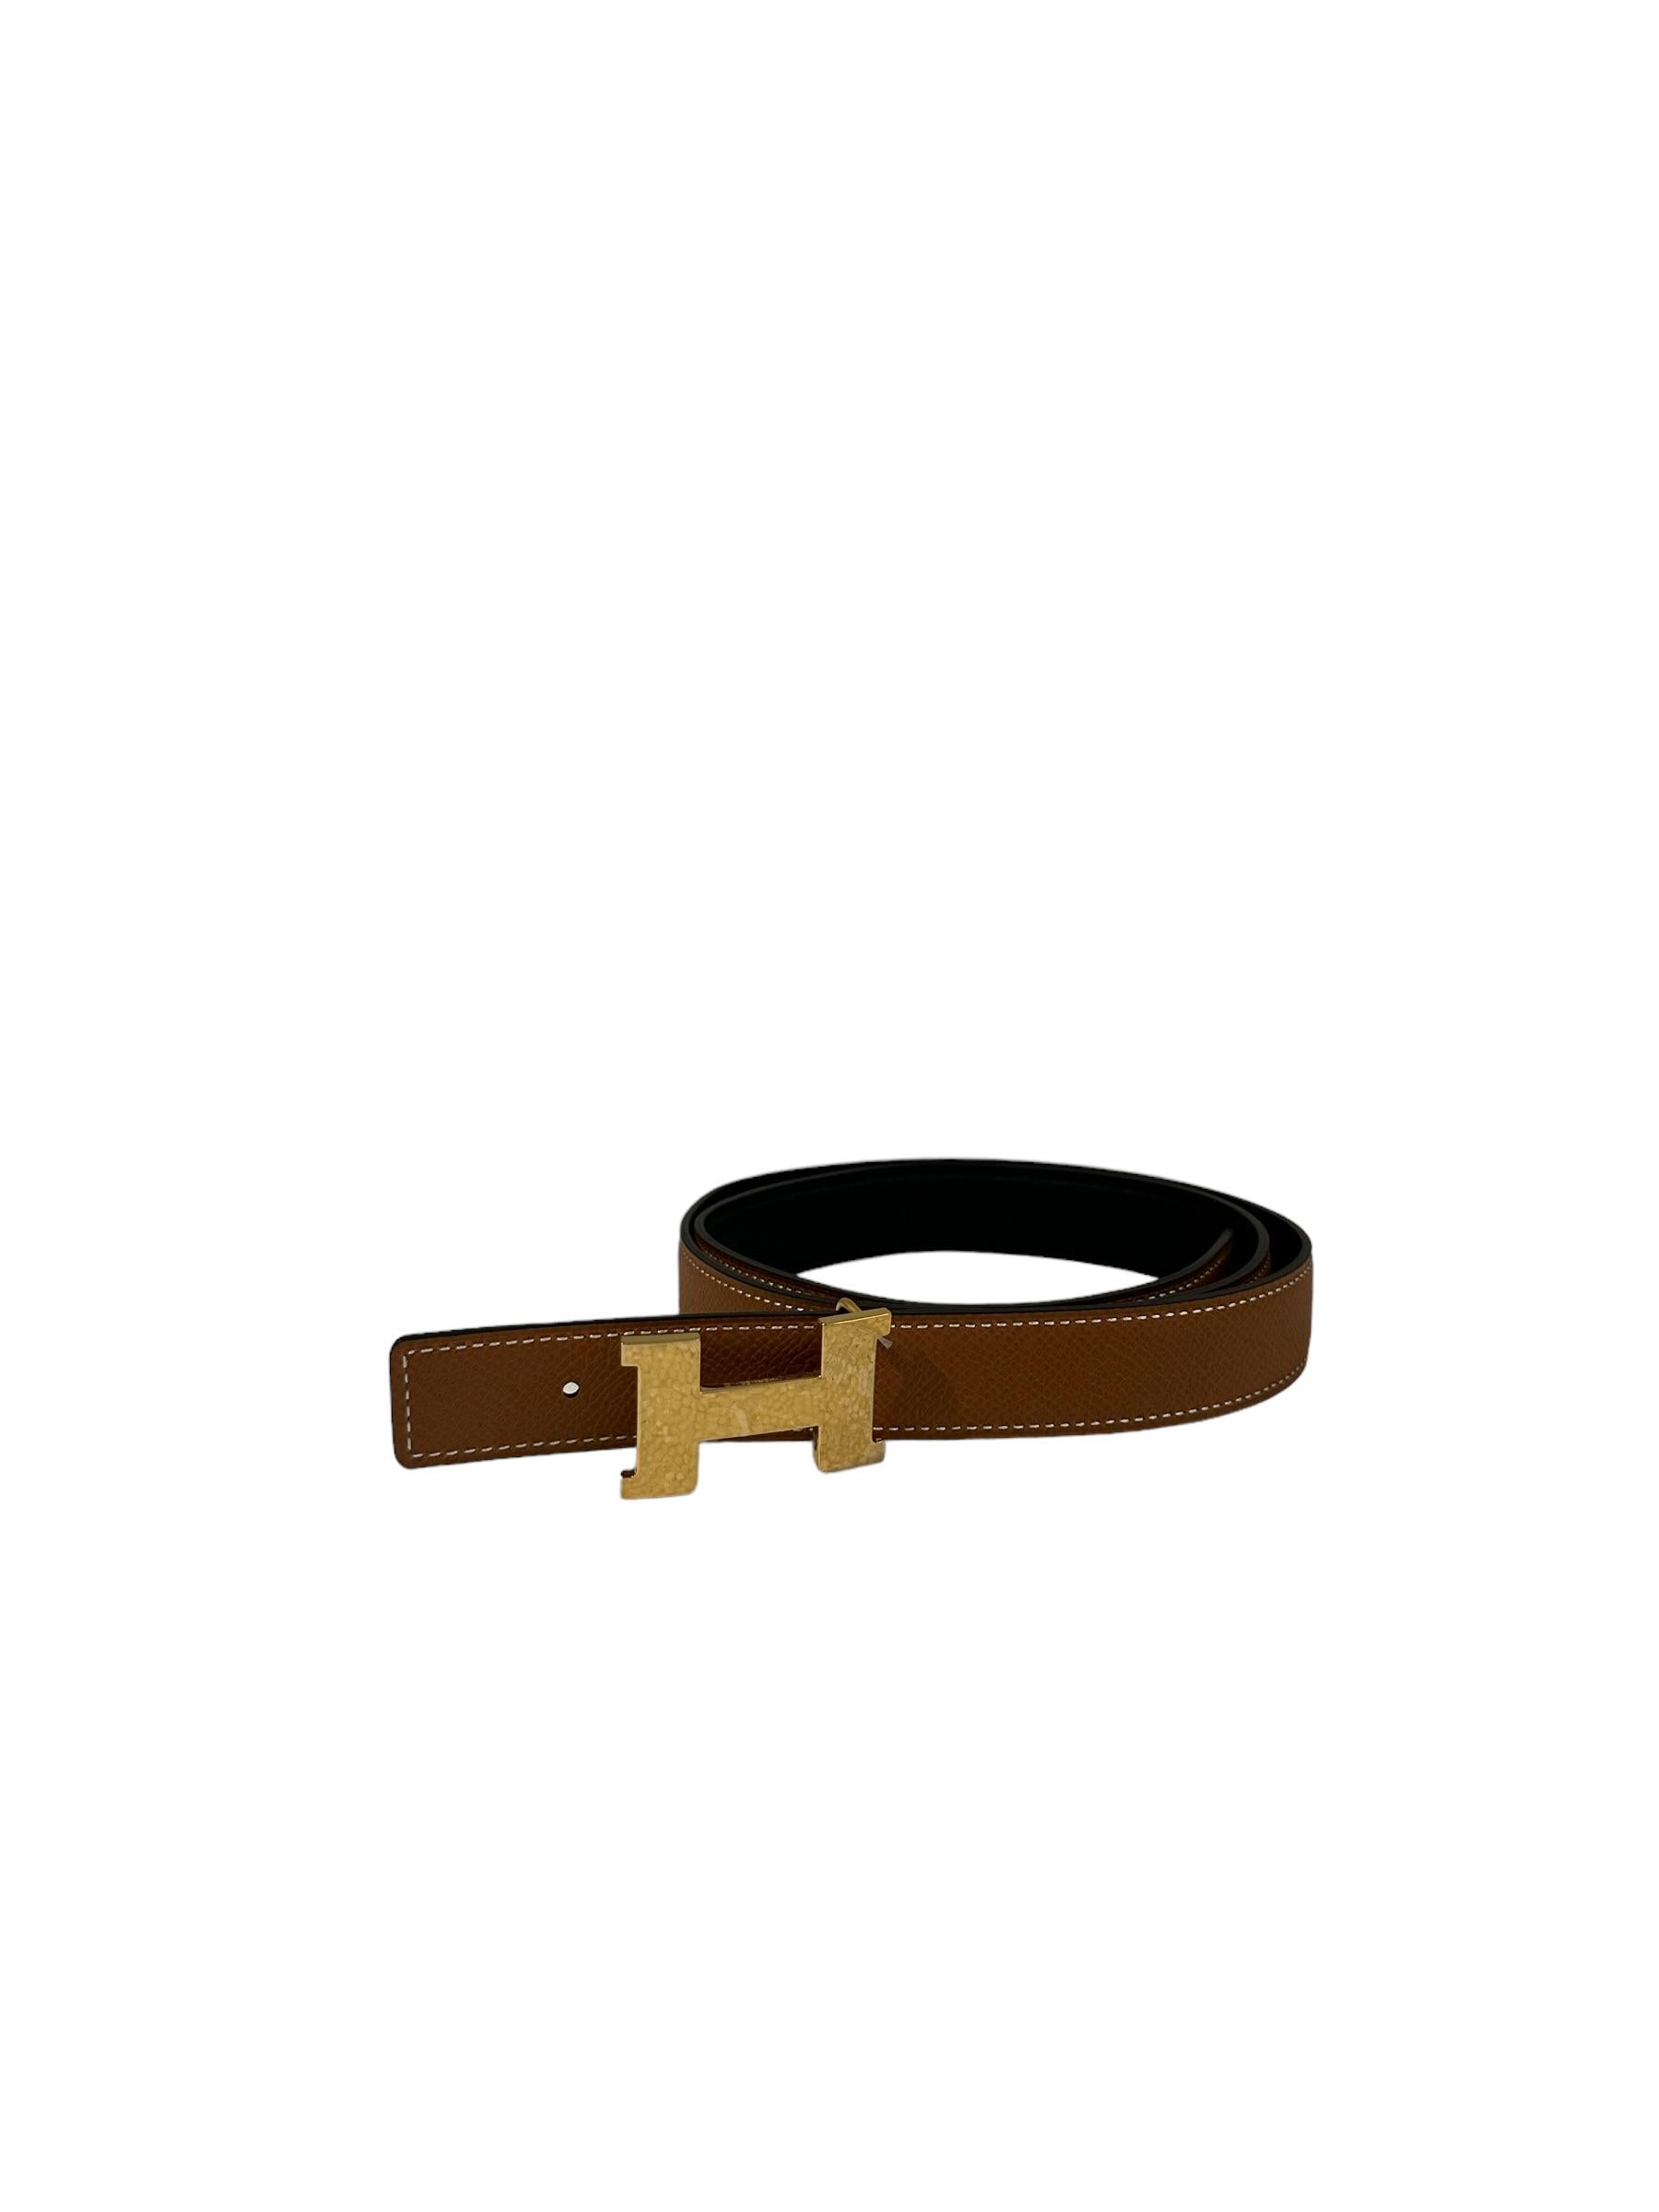 Hermes Belt Mini Constance Martelee Buckle & Reversible Black Gold strap 24 mm In New Condition For Sale In West Chester, PA